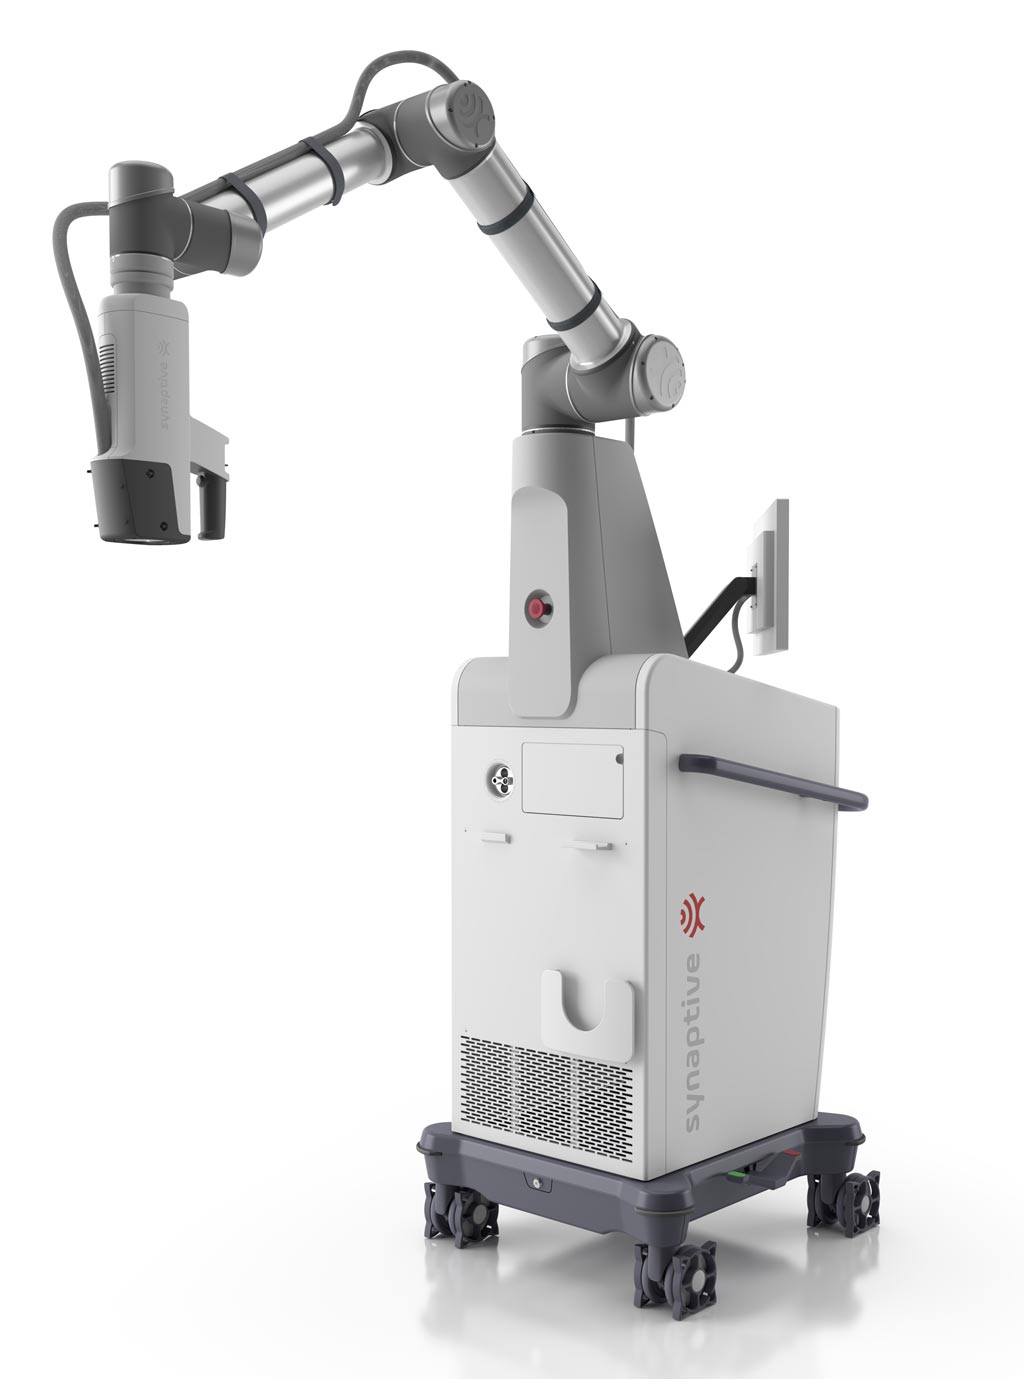 Image: The Modus V provides an alternative to the traditional operating microscope featuring an ocular or eyepiece that is commonly used by neurosurgeons to view magnified images of the brain (Photo courtesy of Synaptive Medical).